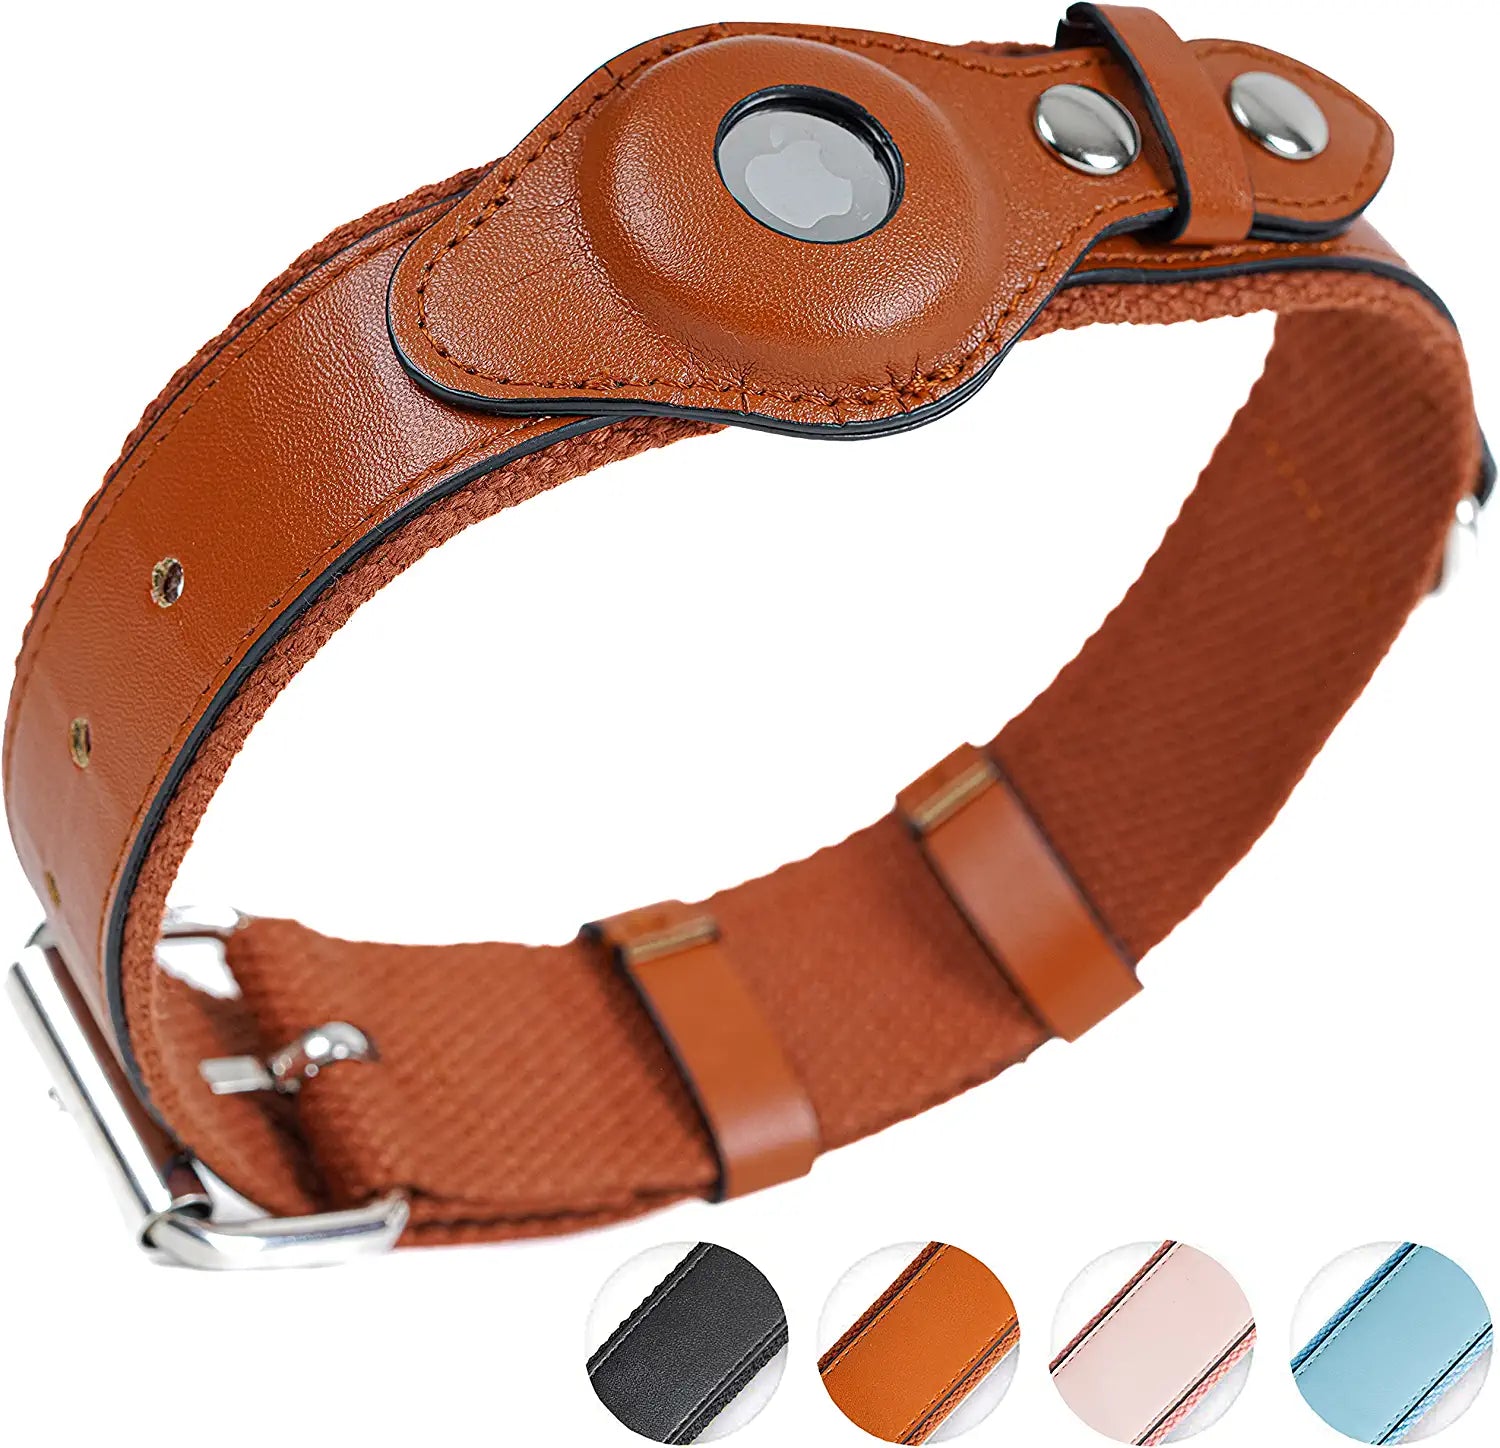 Safe Paws Airtag Dog Collar Holder - Our Adjustable Air Tag Dog Collar Holder Fits Small Medium and Large Dogs - Use Our Elegant PU Leather Dog Airtag Collar to Quickly Locate Your Dog